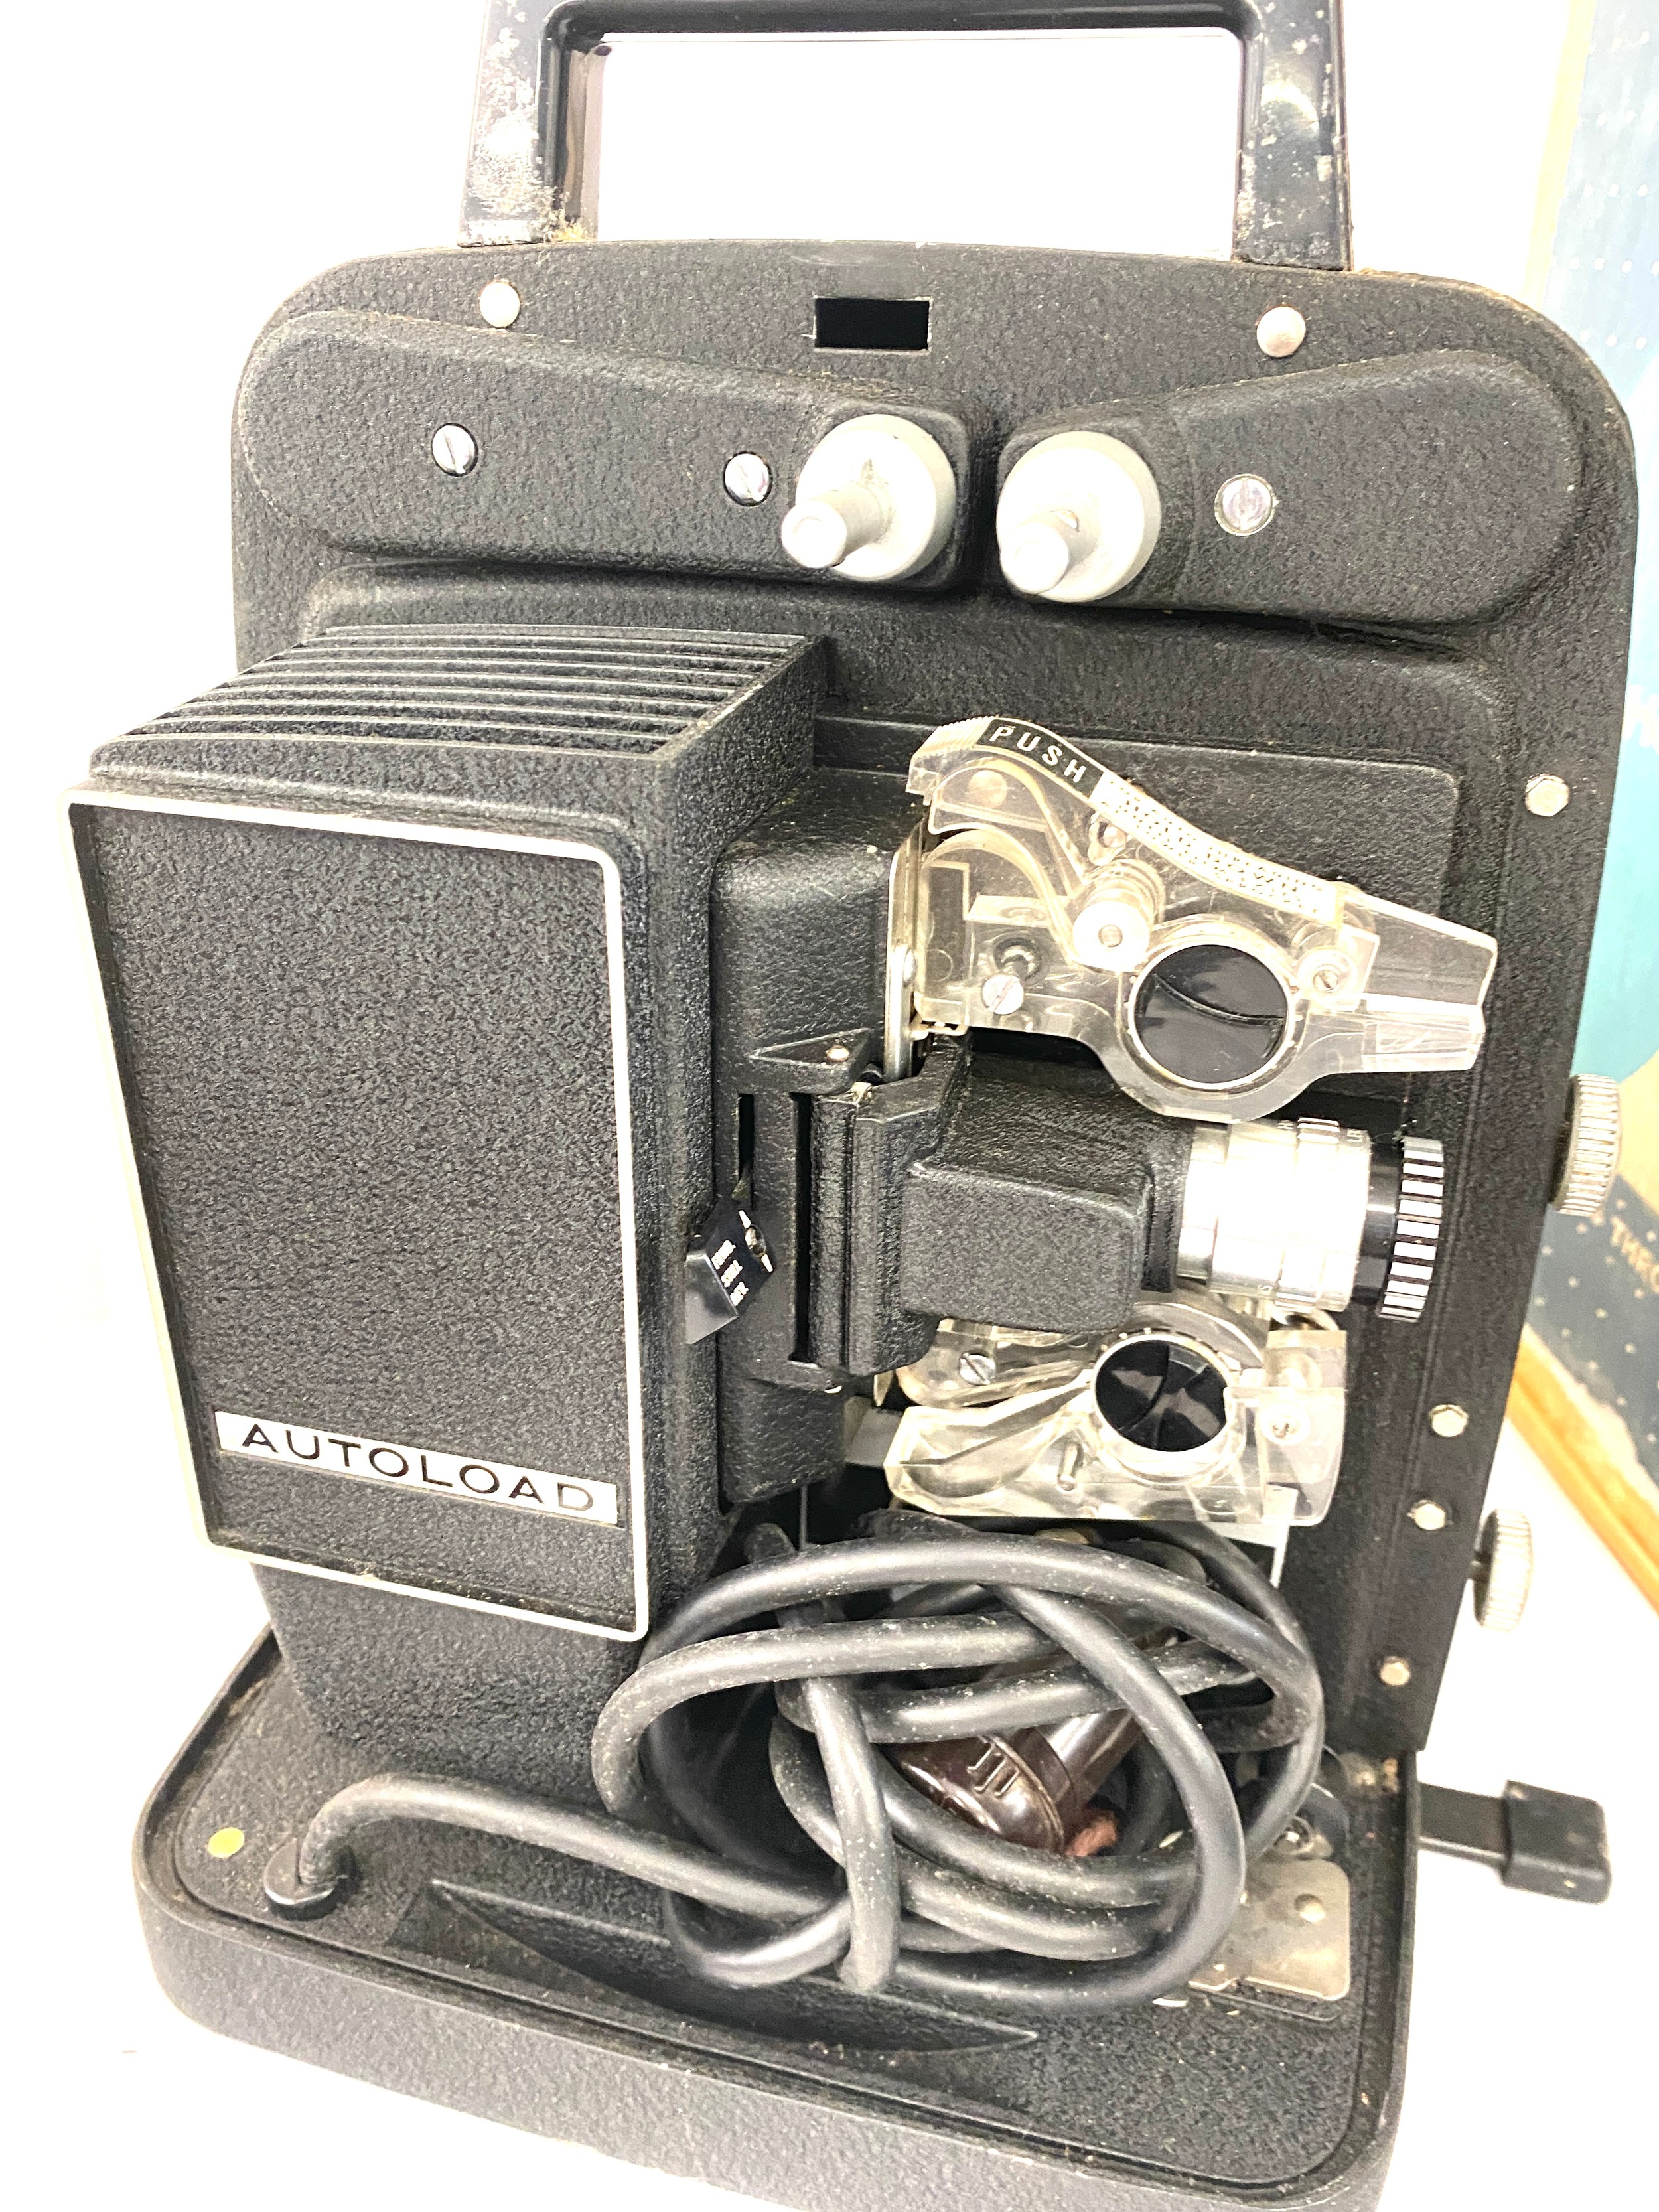 Bell and Howell auto load cased projector, untested - Image 2 of 2